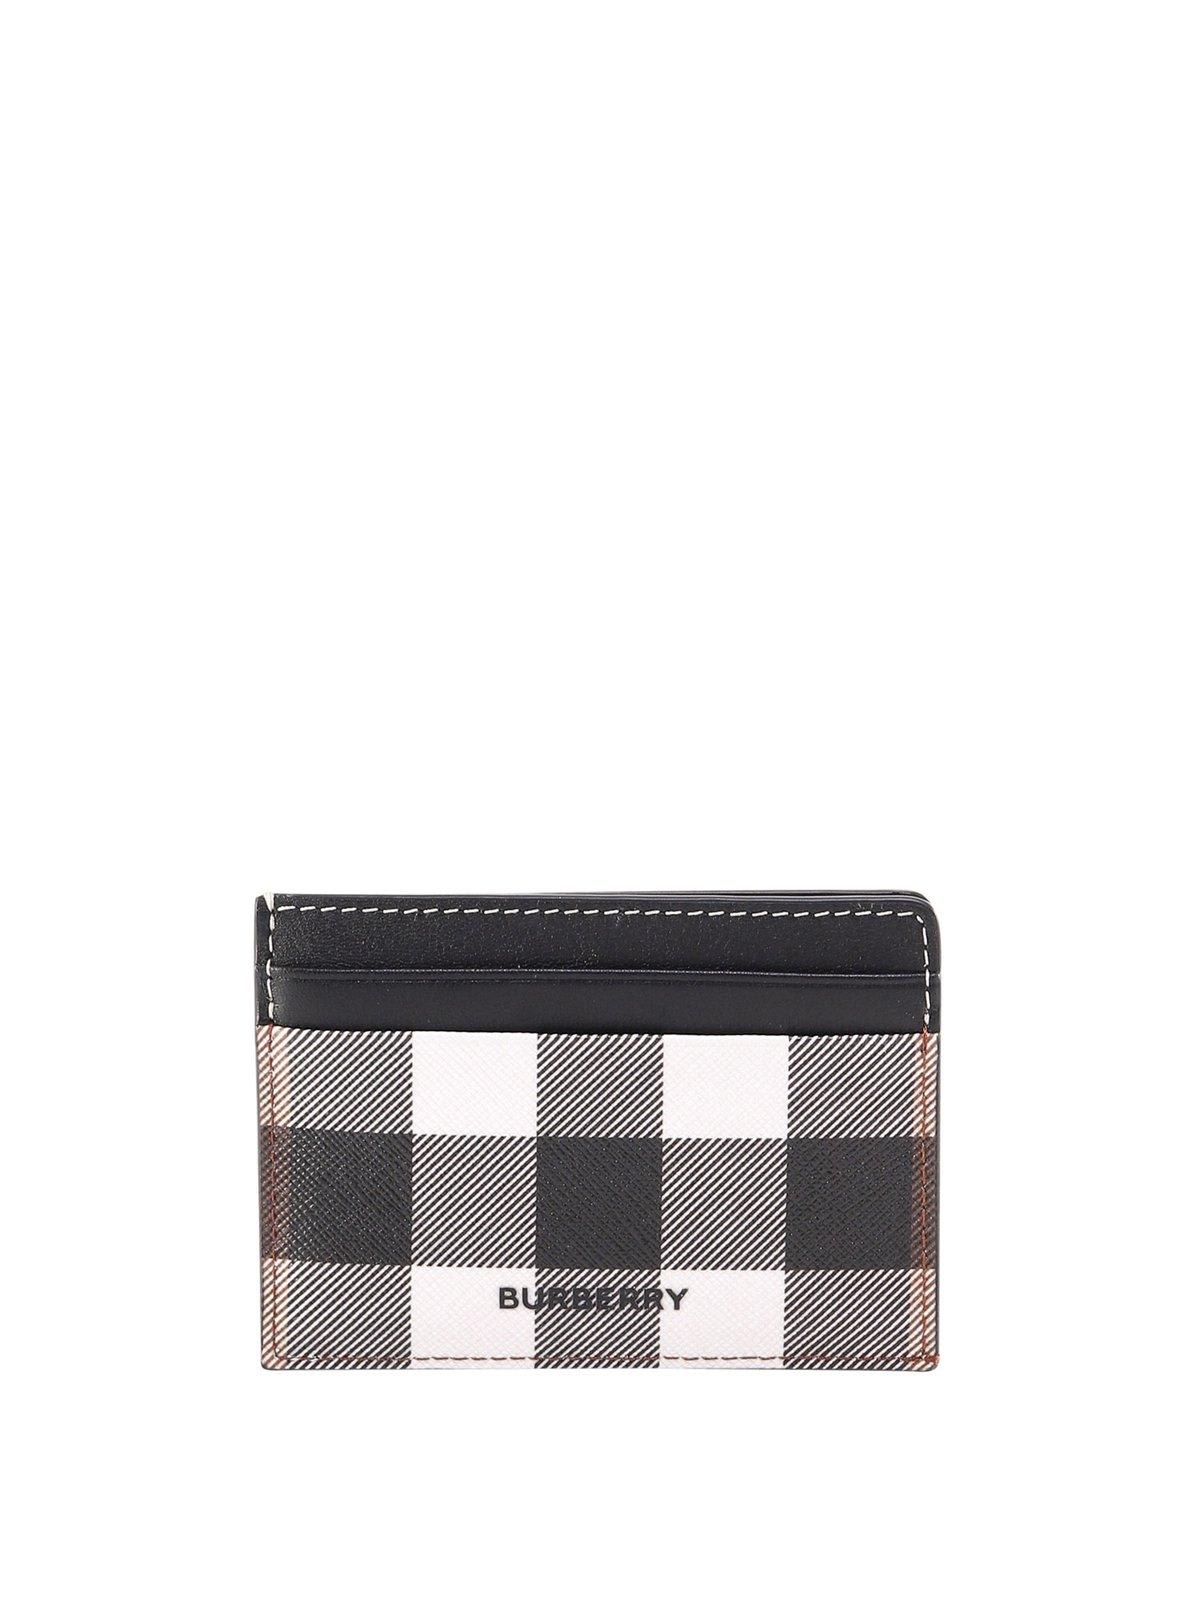 Burberry Check Printed Cardholder